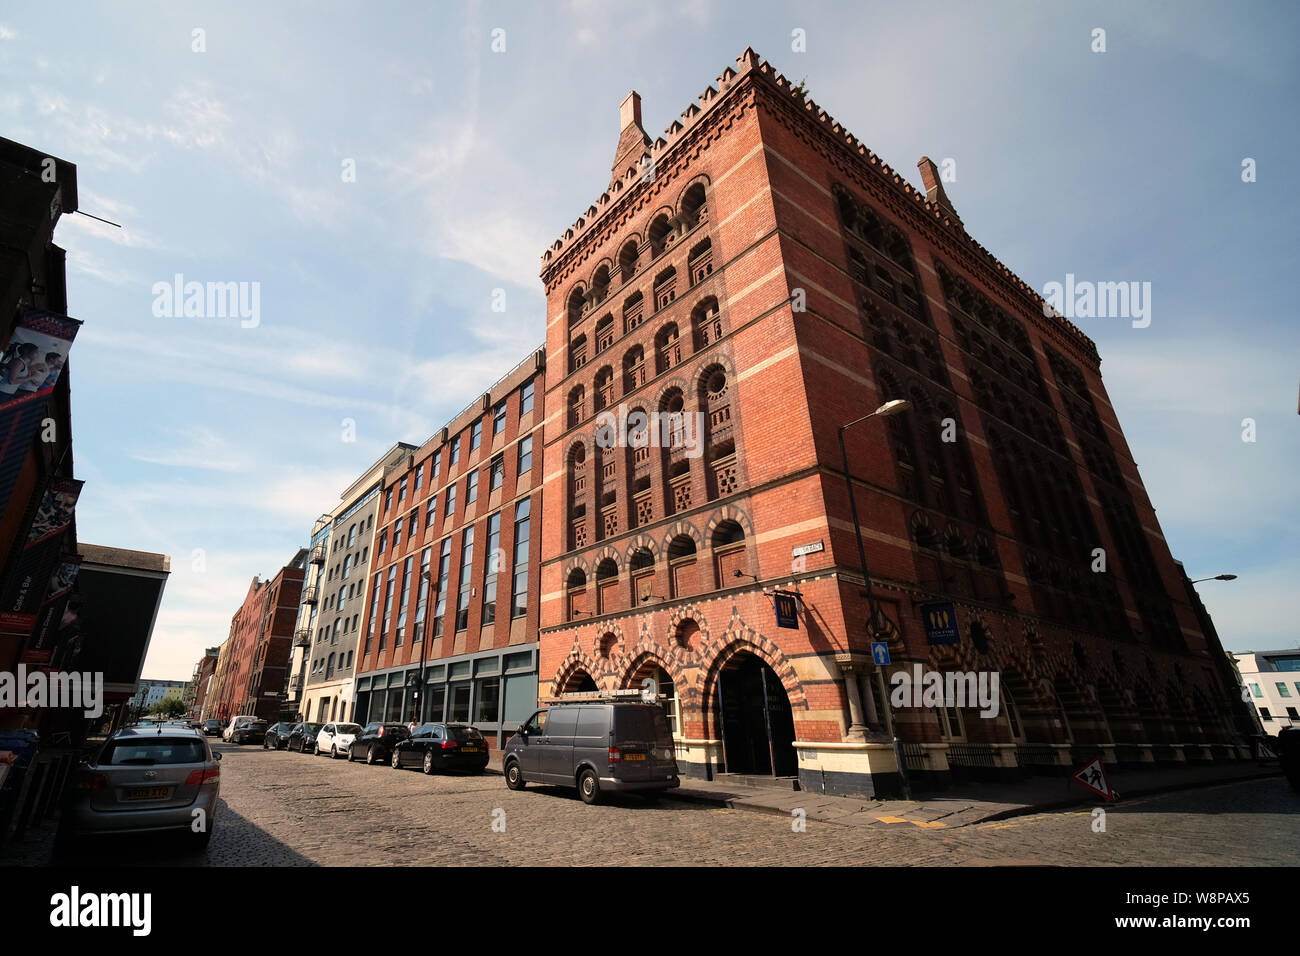 The grade II listed building. The Granary in Bristol. Stock Photo